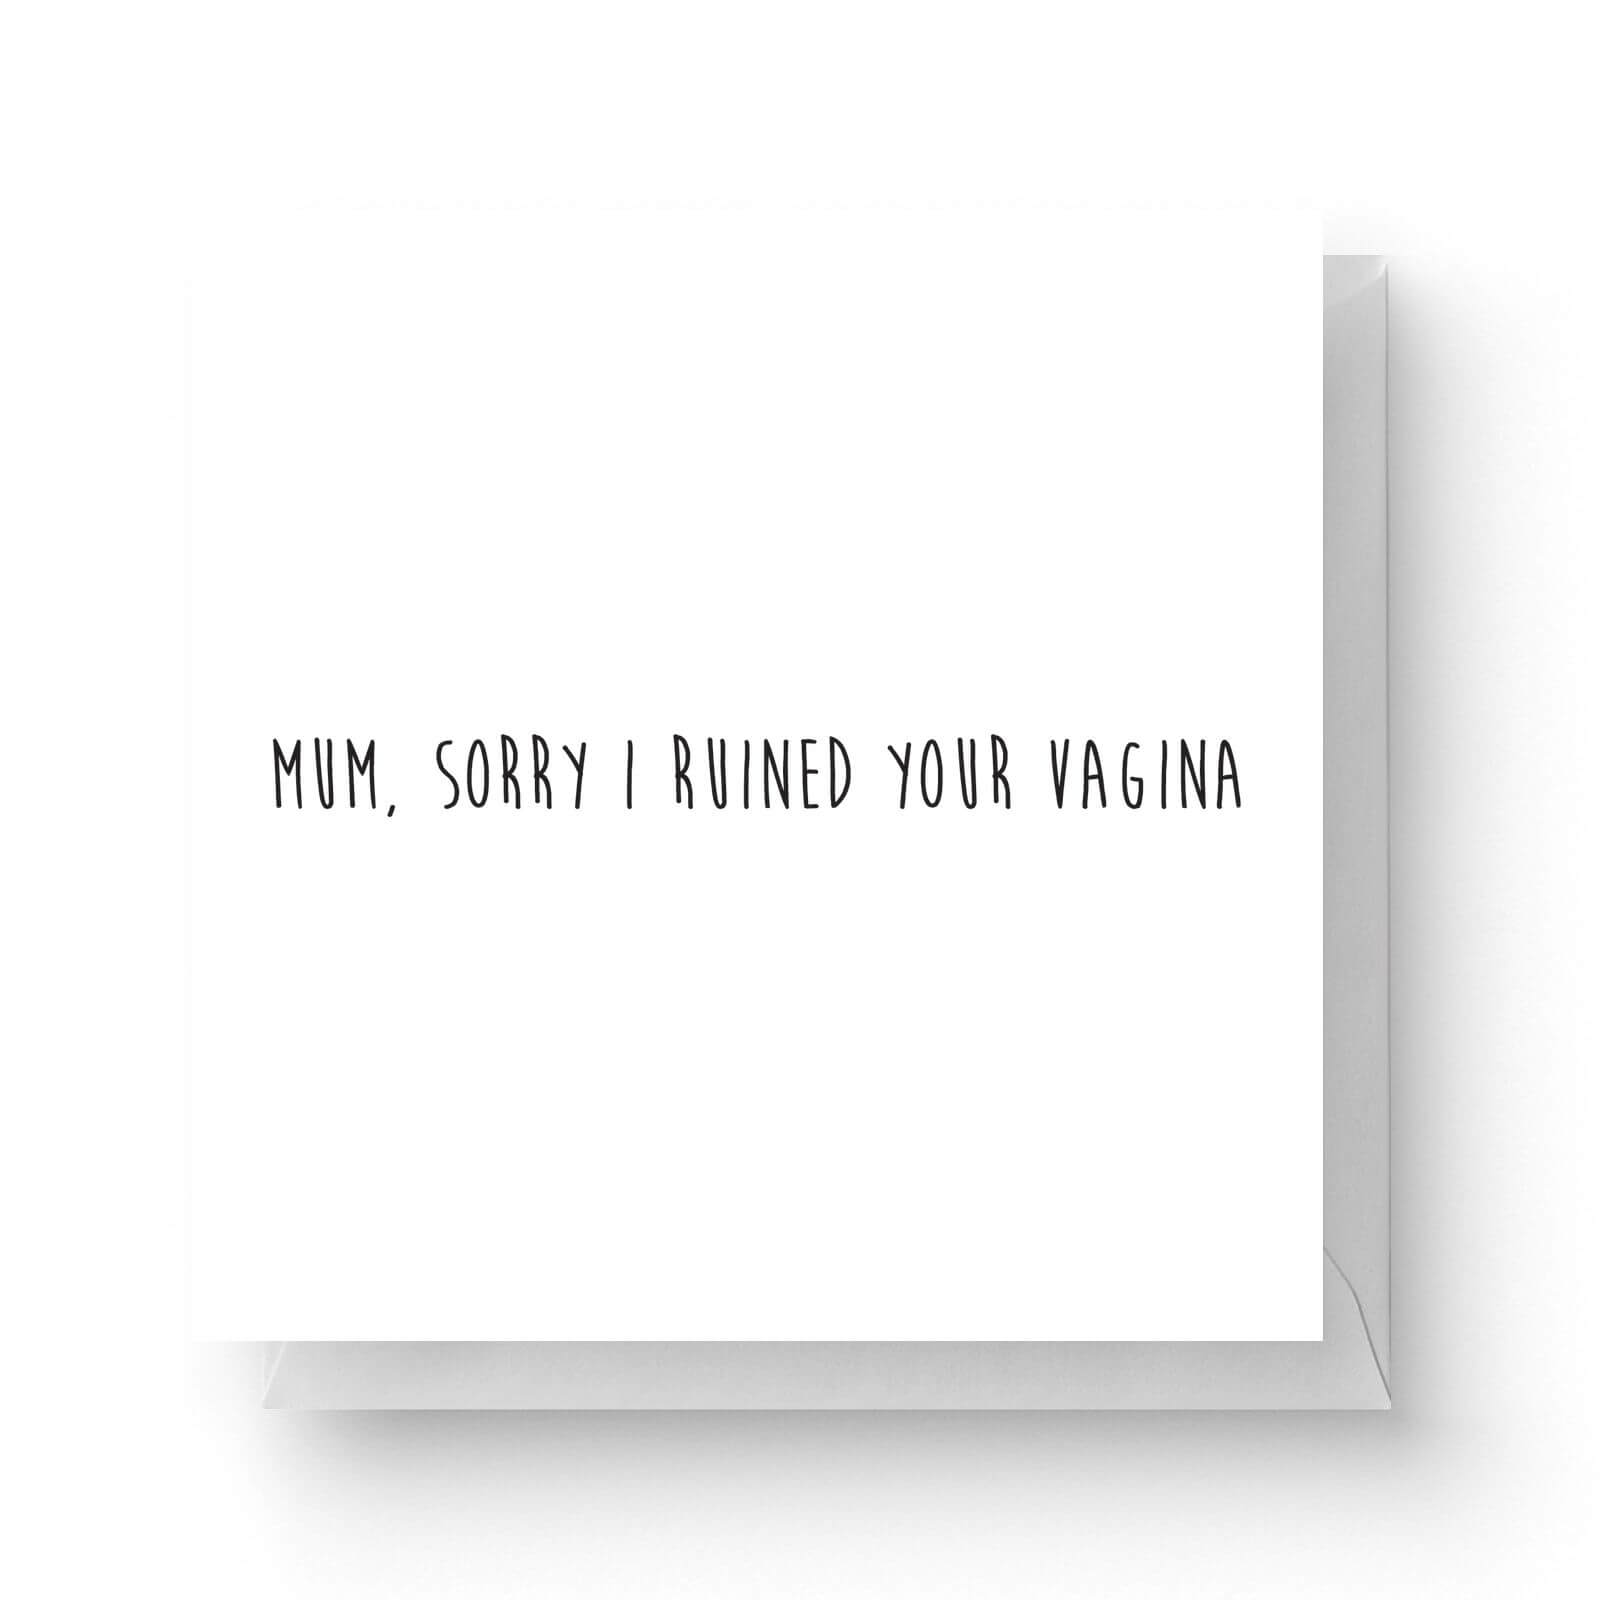 Image of Mum, Sorry I Ruined Your Vagina Square Greetings Card (14.8cm x 14.8cm)